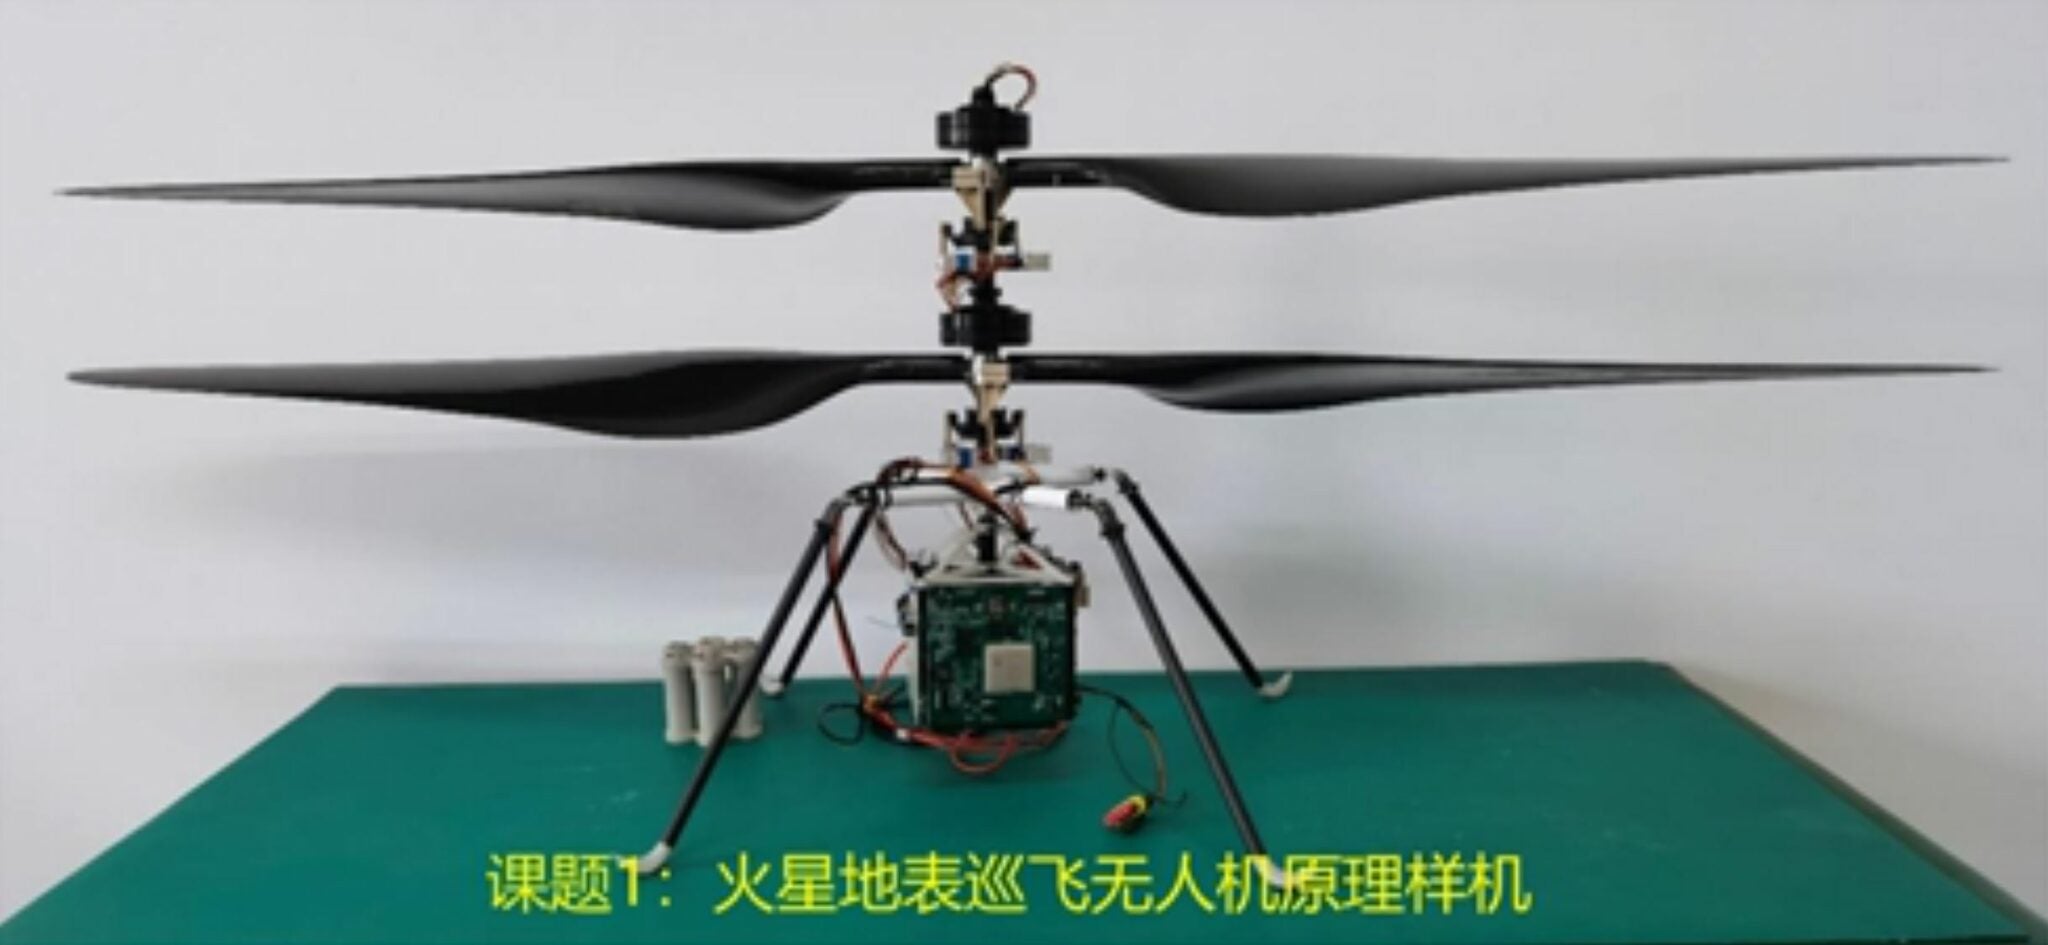 Image of Mars surface cruise drone prototype shared by China’s NSSC